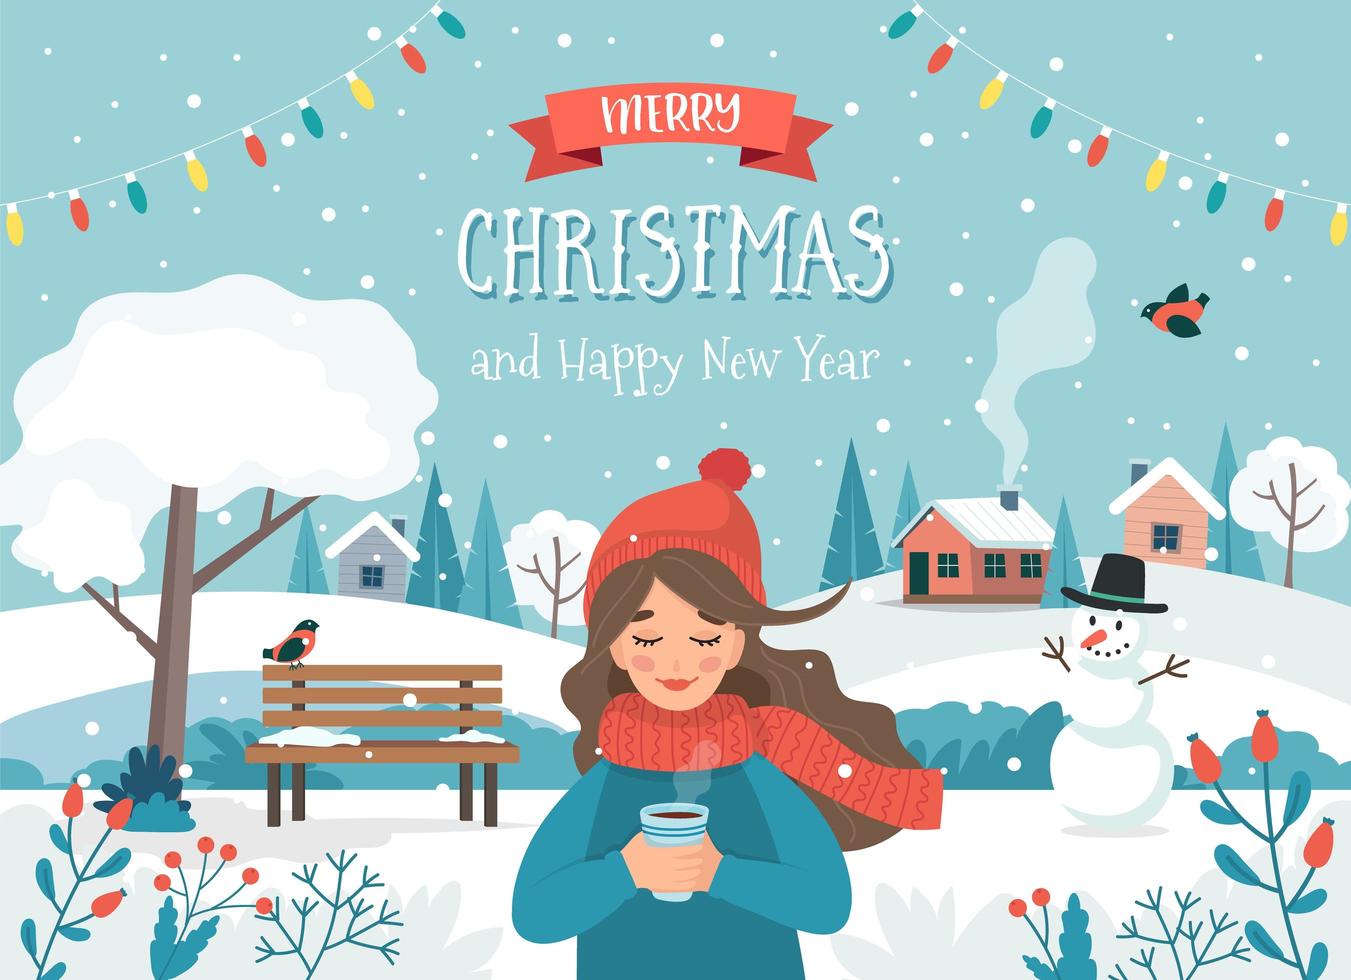 Merry Christmas card with girl and winter landscape vector